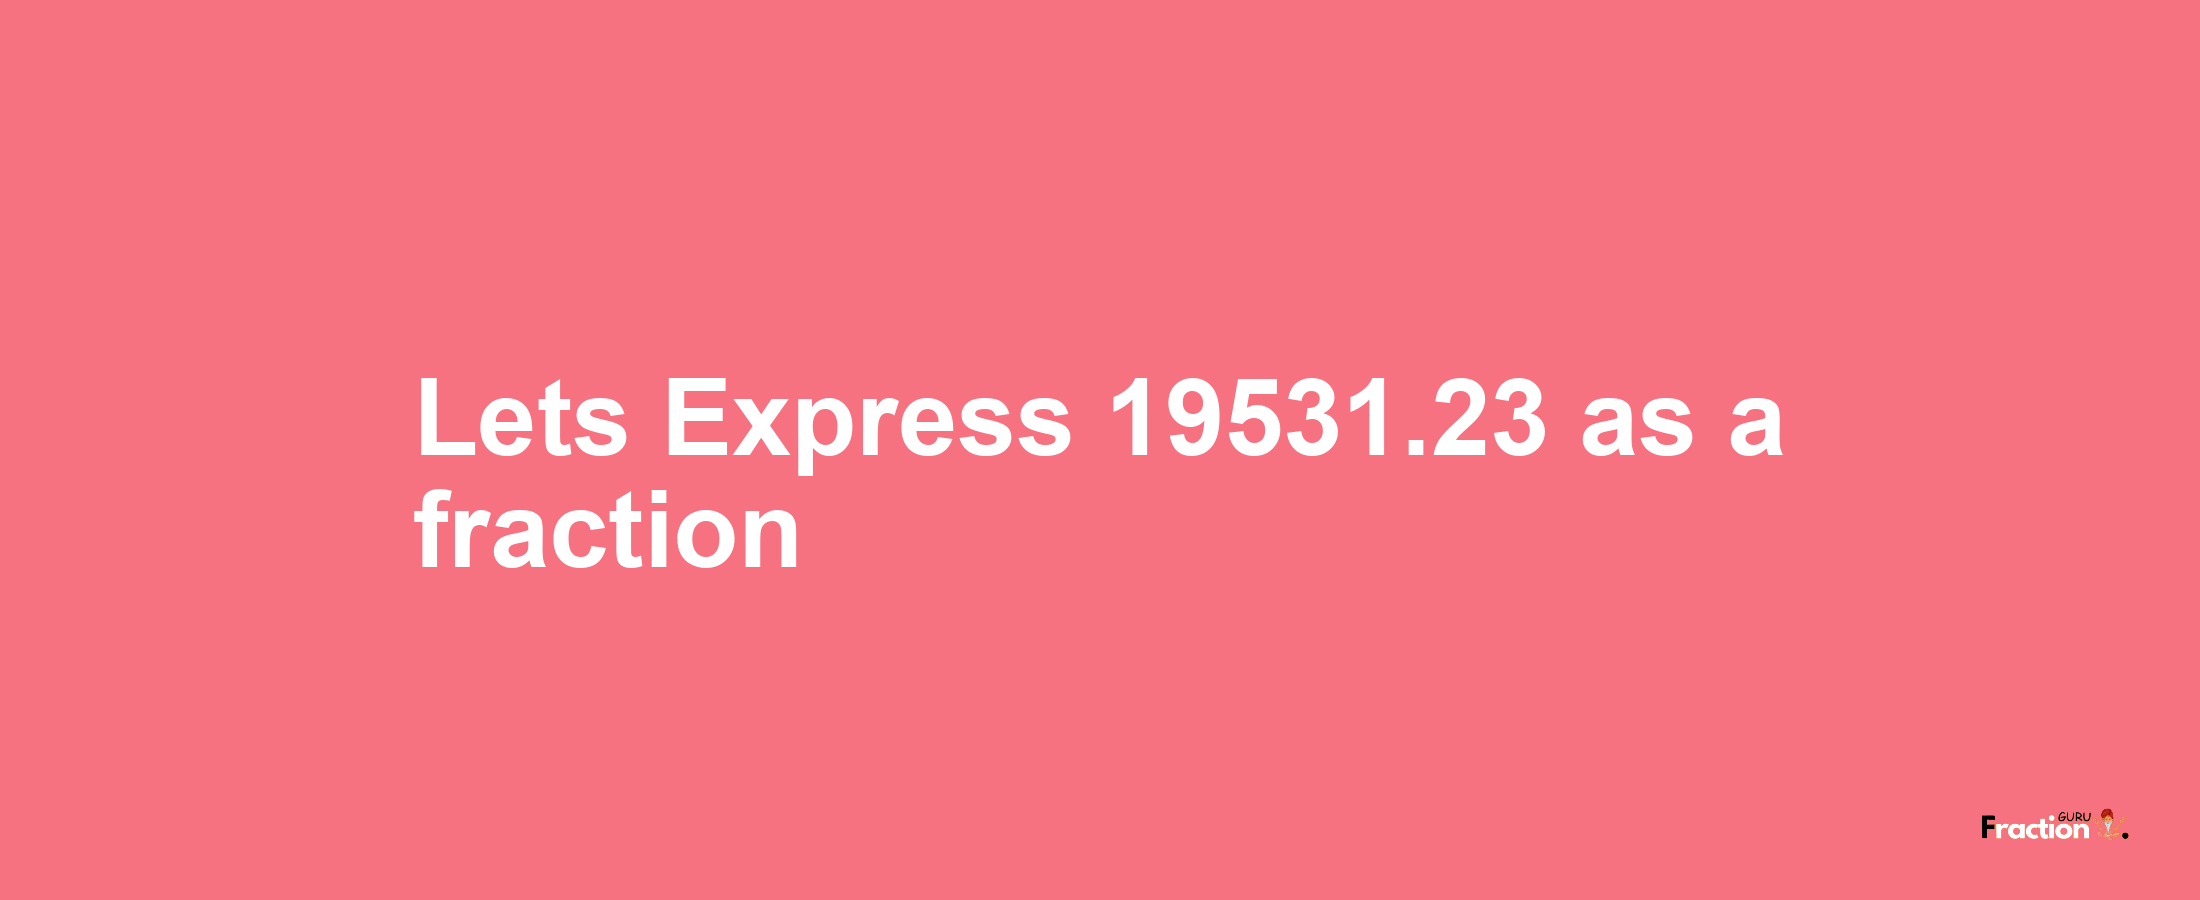 Lets Express 19531.23 as afraction